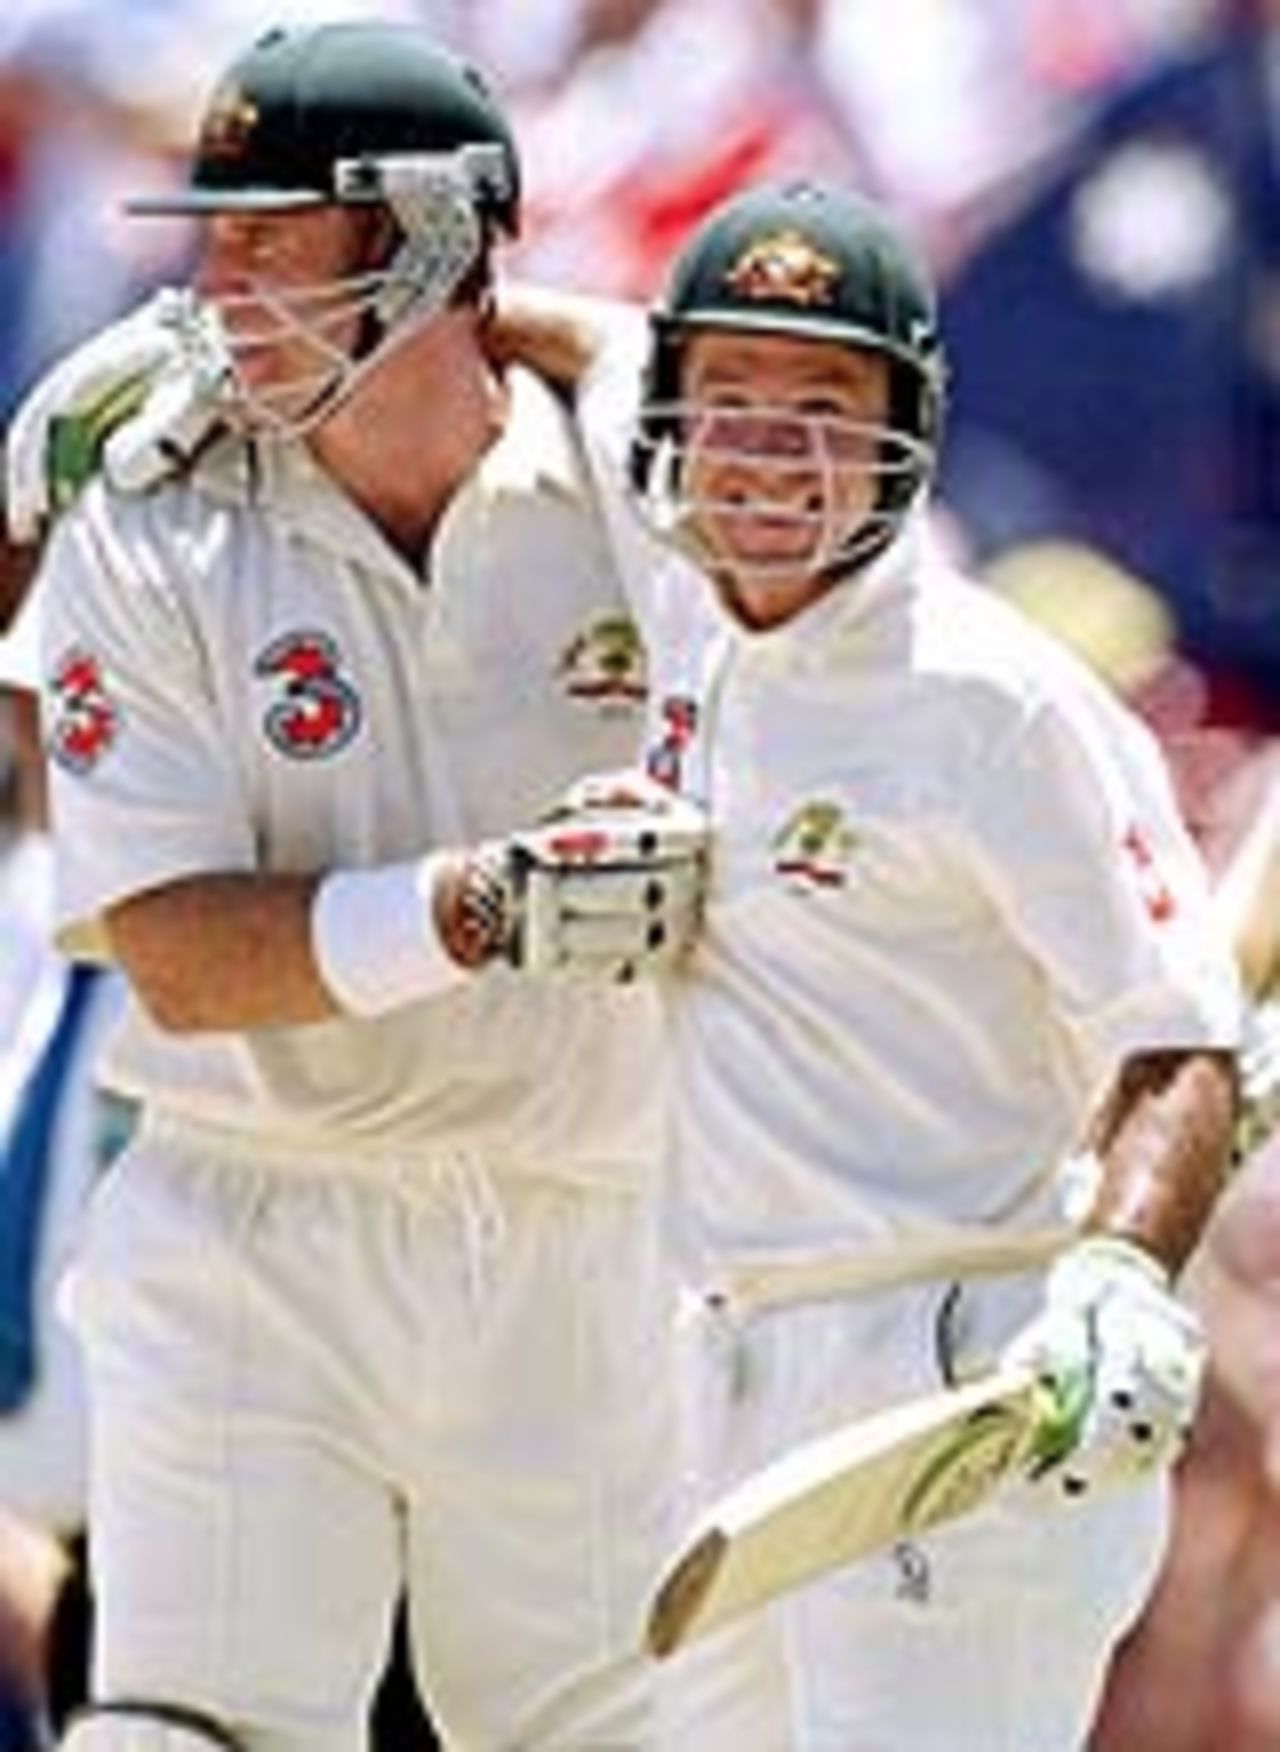 Matthew Hayden and Ricky Ponting celebrate after scoring the winning runs in the Boxing Day Test, Australia v India, 3rd Test, Melbourne, 5th day, December 30, 2003